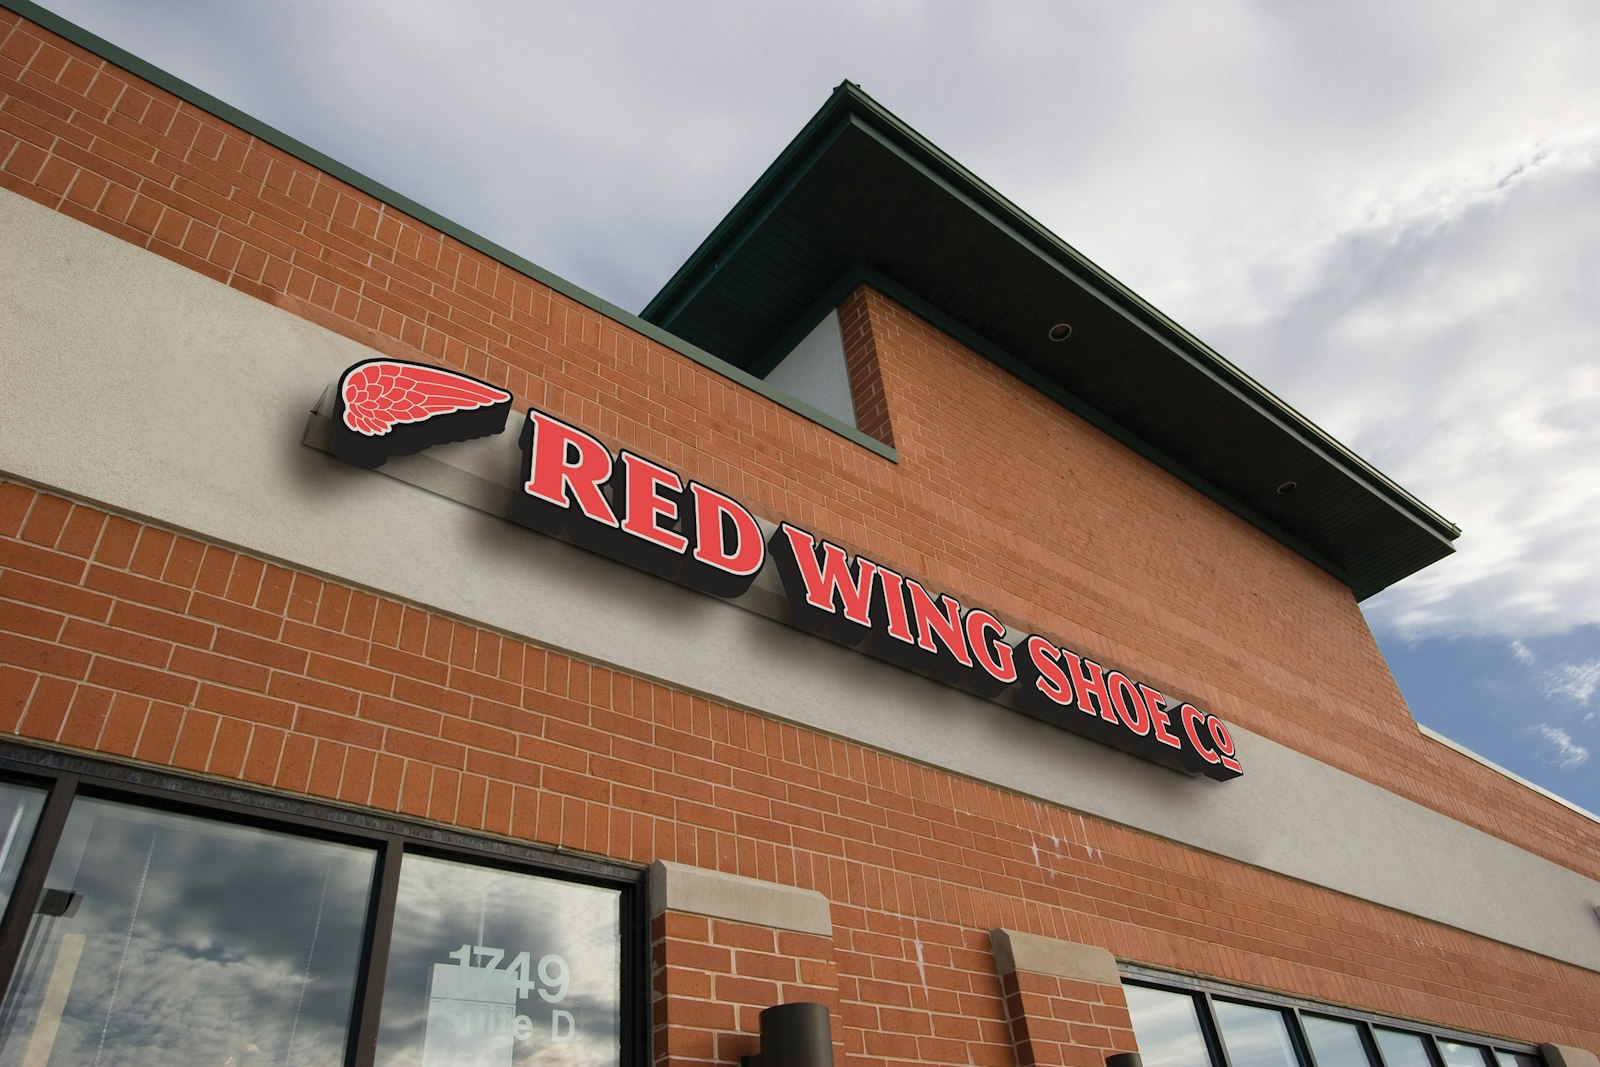 The Red Wing Shoes brand design logo on retail signage outside.